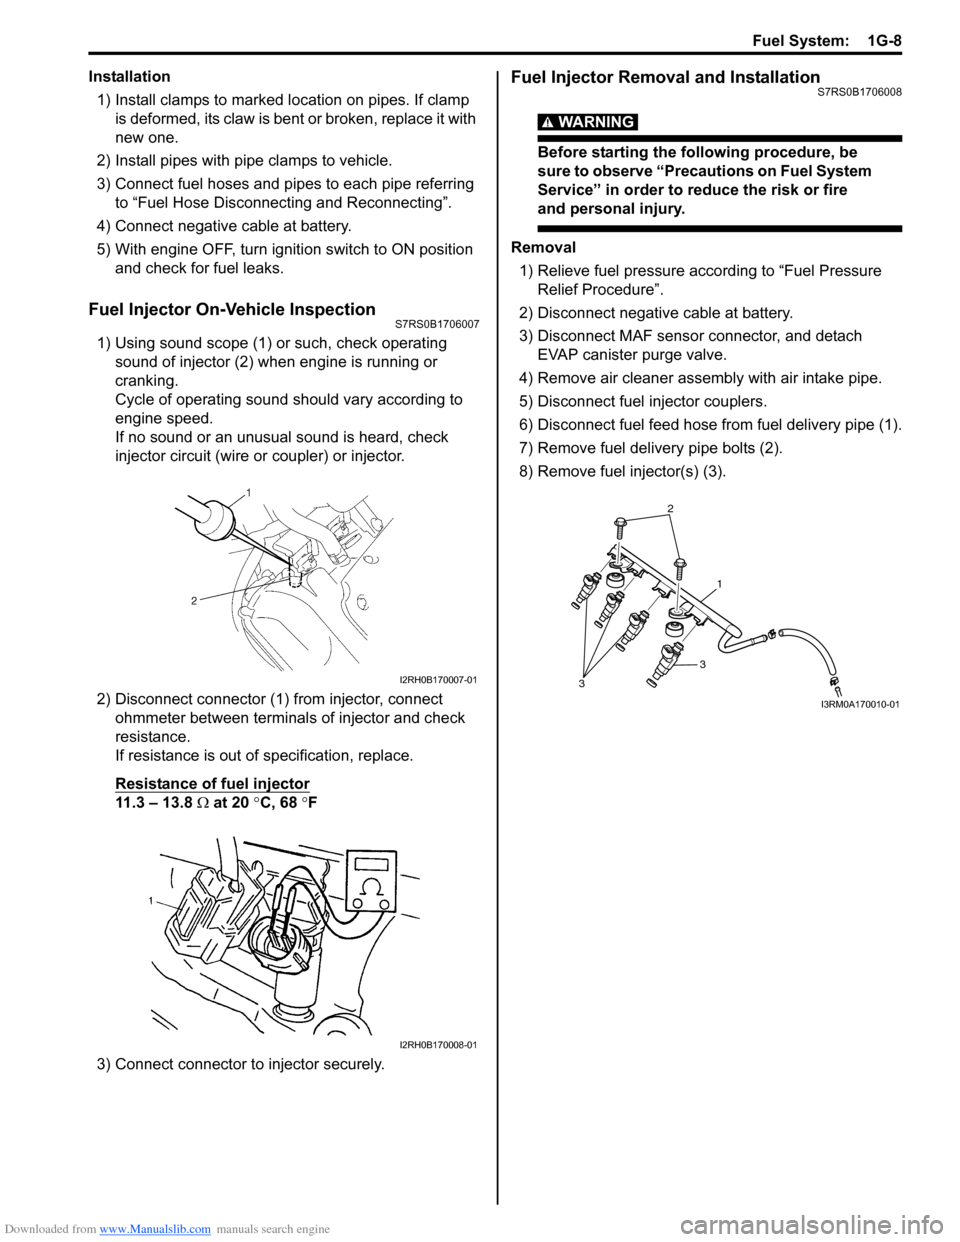 SUZUKI SWIFT 2008 2.G Service Repair Manual Downloaded from www.Manualslib.com manuals search engine Fuel System:  1G-8
Installation1) Install clamps to marked location on pipes. If clamp  is deformed, its claw is bent  or broken, replace it wi